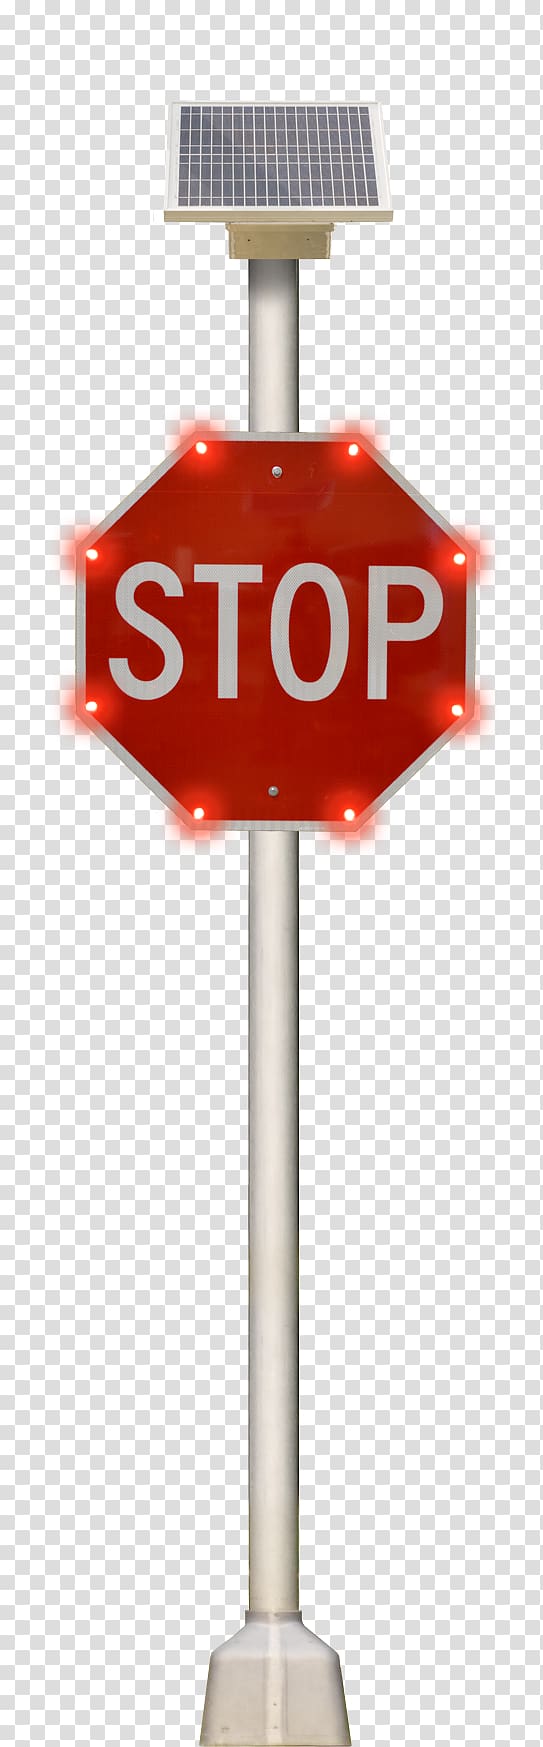 Stop sign Road Warning sign Pedestrian crossing Beacon, road transparent background PNG clipart